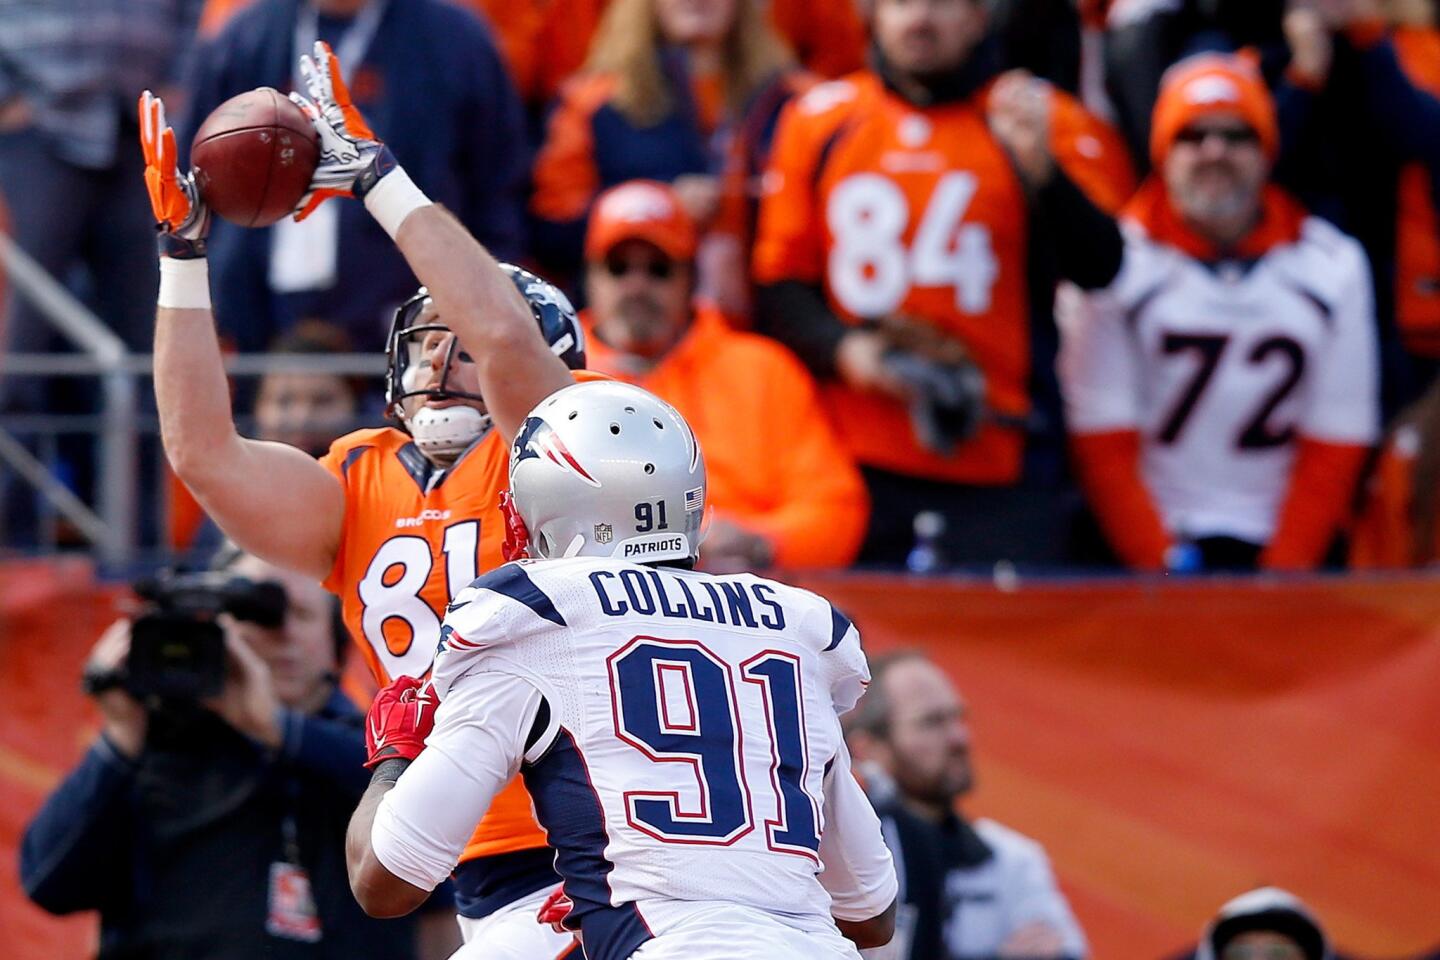 Denver tight end Owen Daniels reaches up for a 12-yard touchdown grab over Patriots linebacker Jamie Collins during the second quarter of the AFC Championship game on Jan. 24.